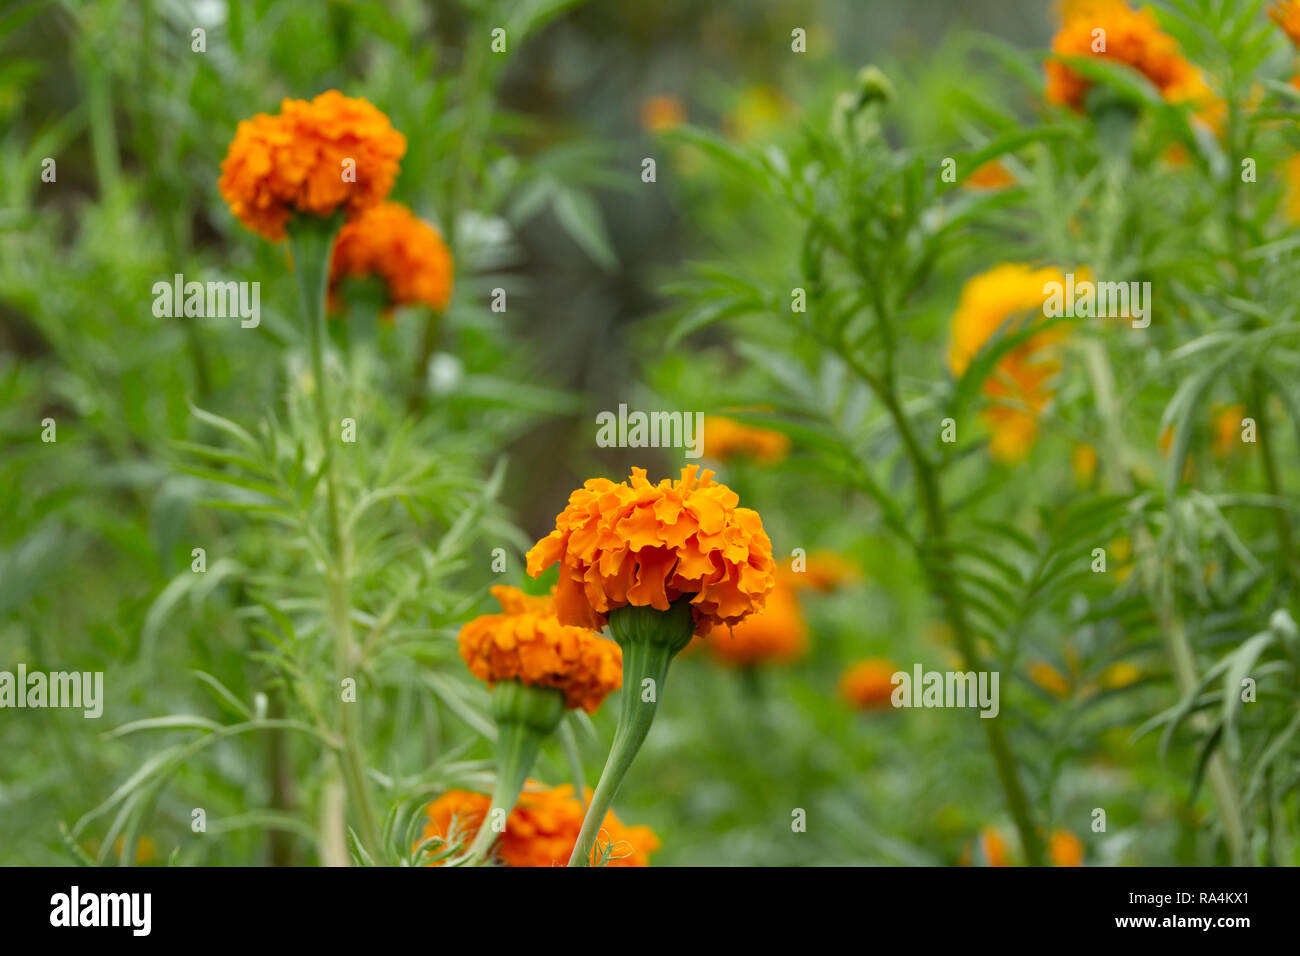 Detail photograph of some traditional marigold cempasuchil mexican flowers  Stock Photo - Alamy